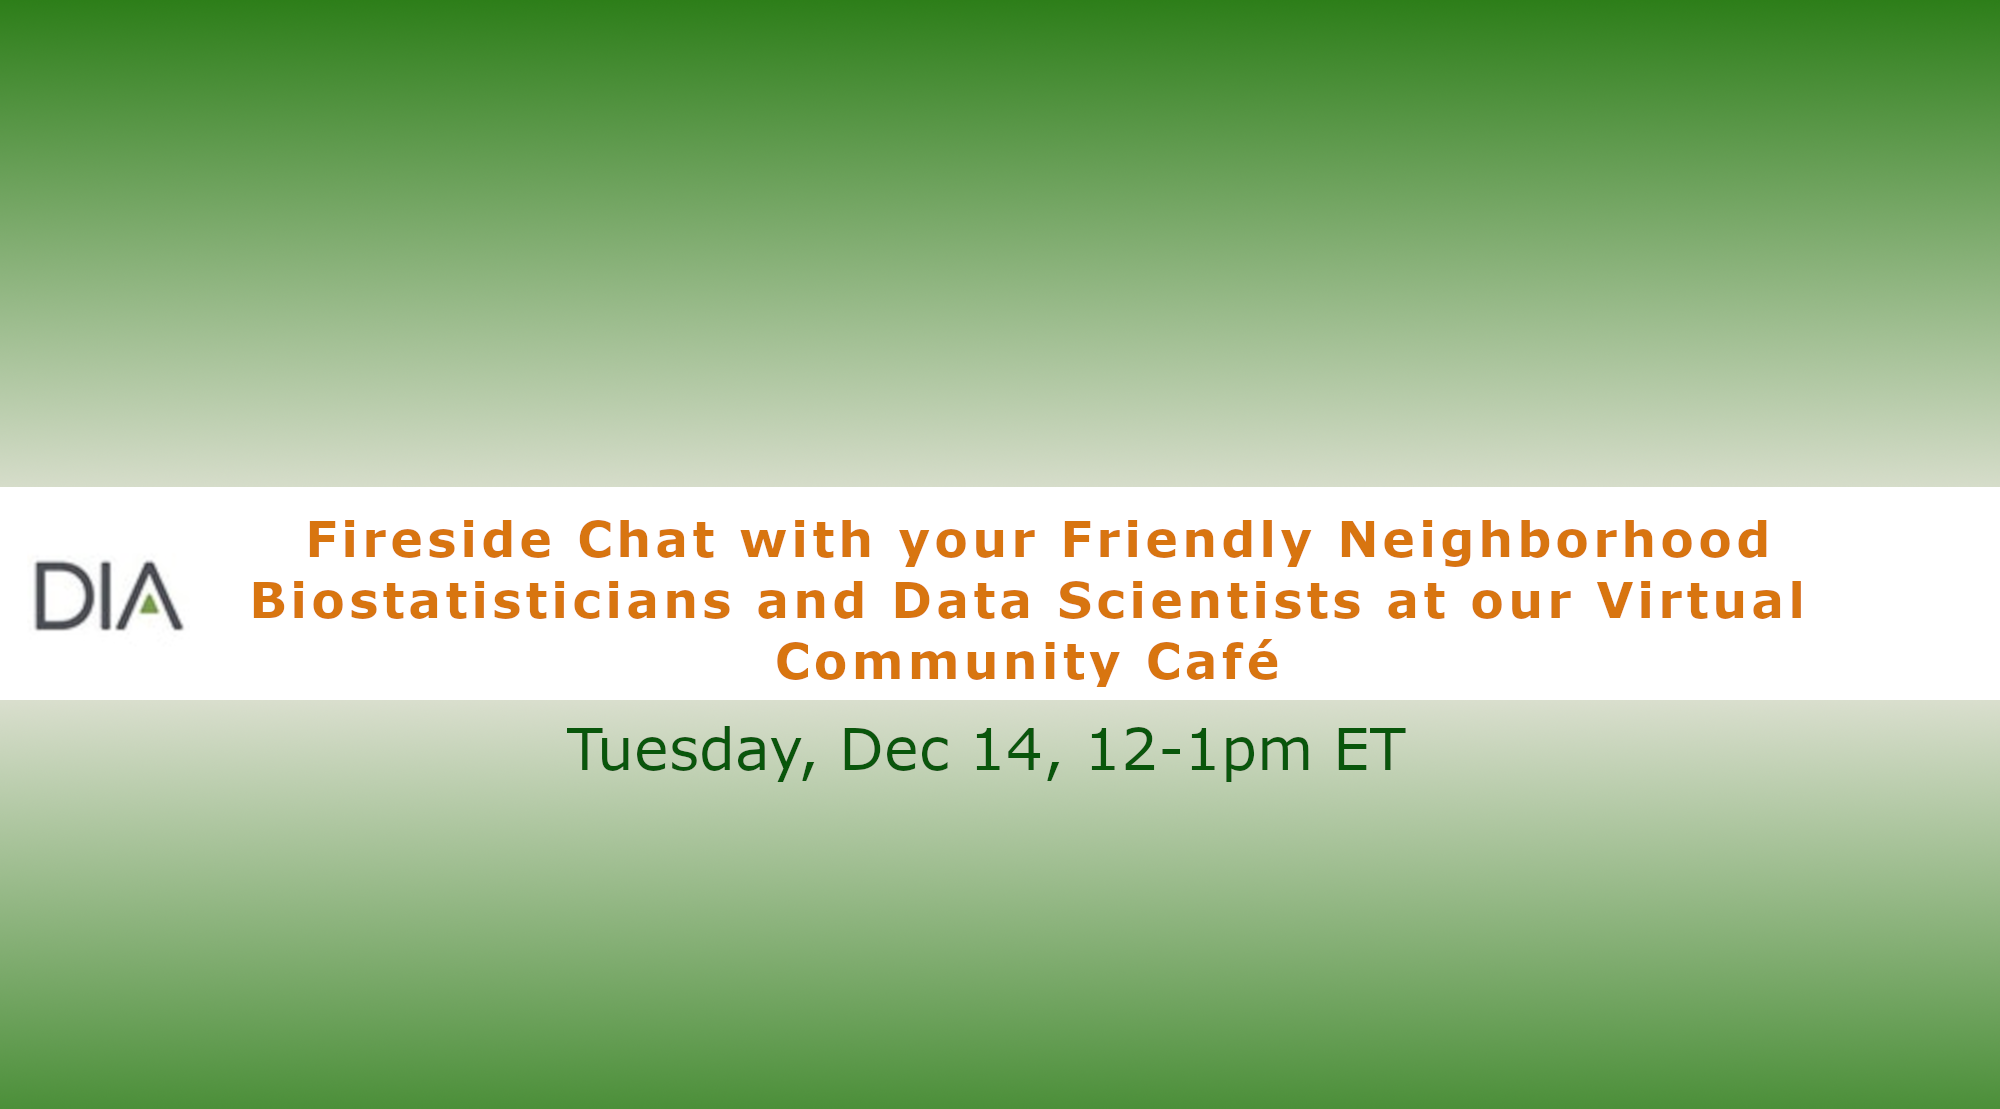 Fireside Chat with your Friendly Neighborhood Biostatisticians and Data Scientists at our Virtual Community Café